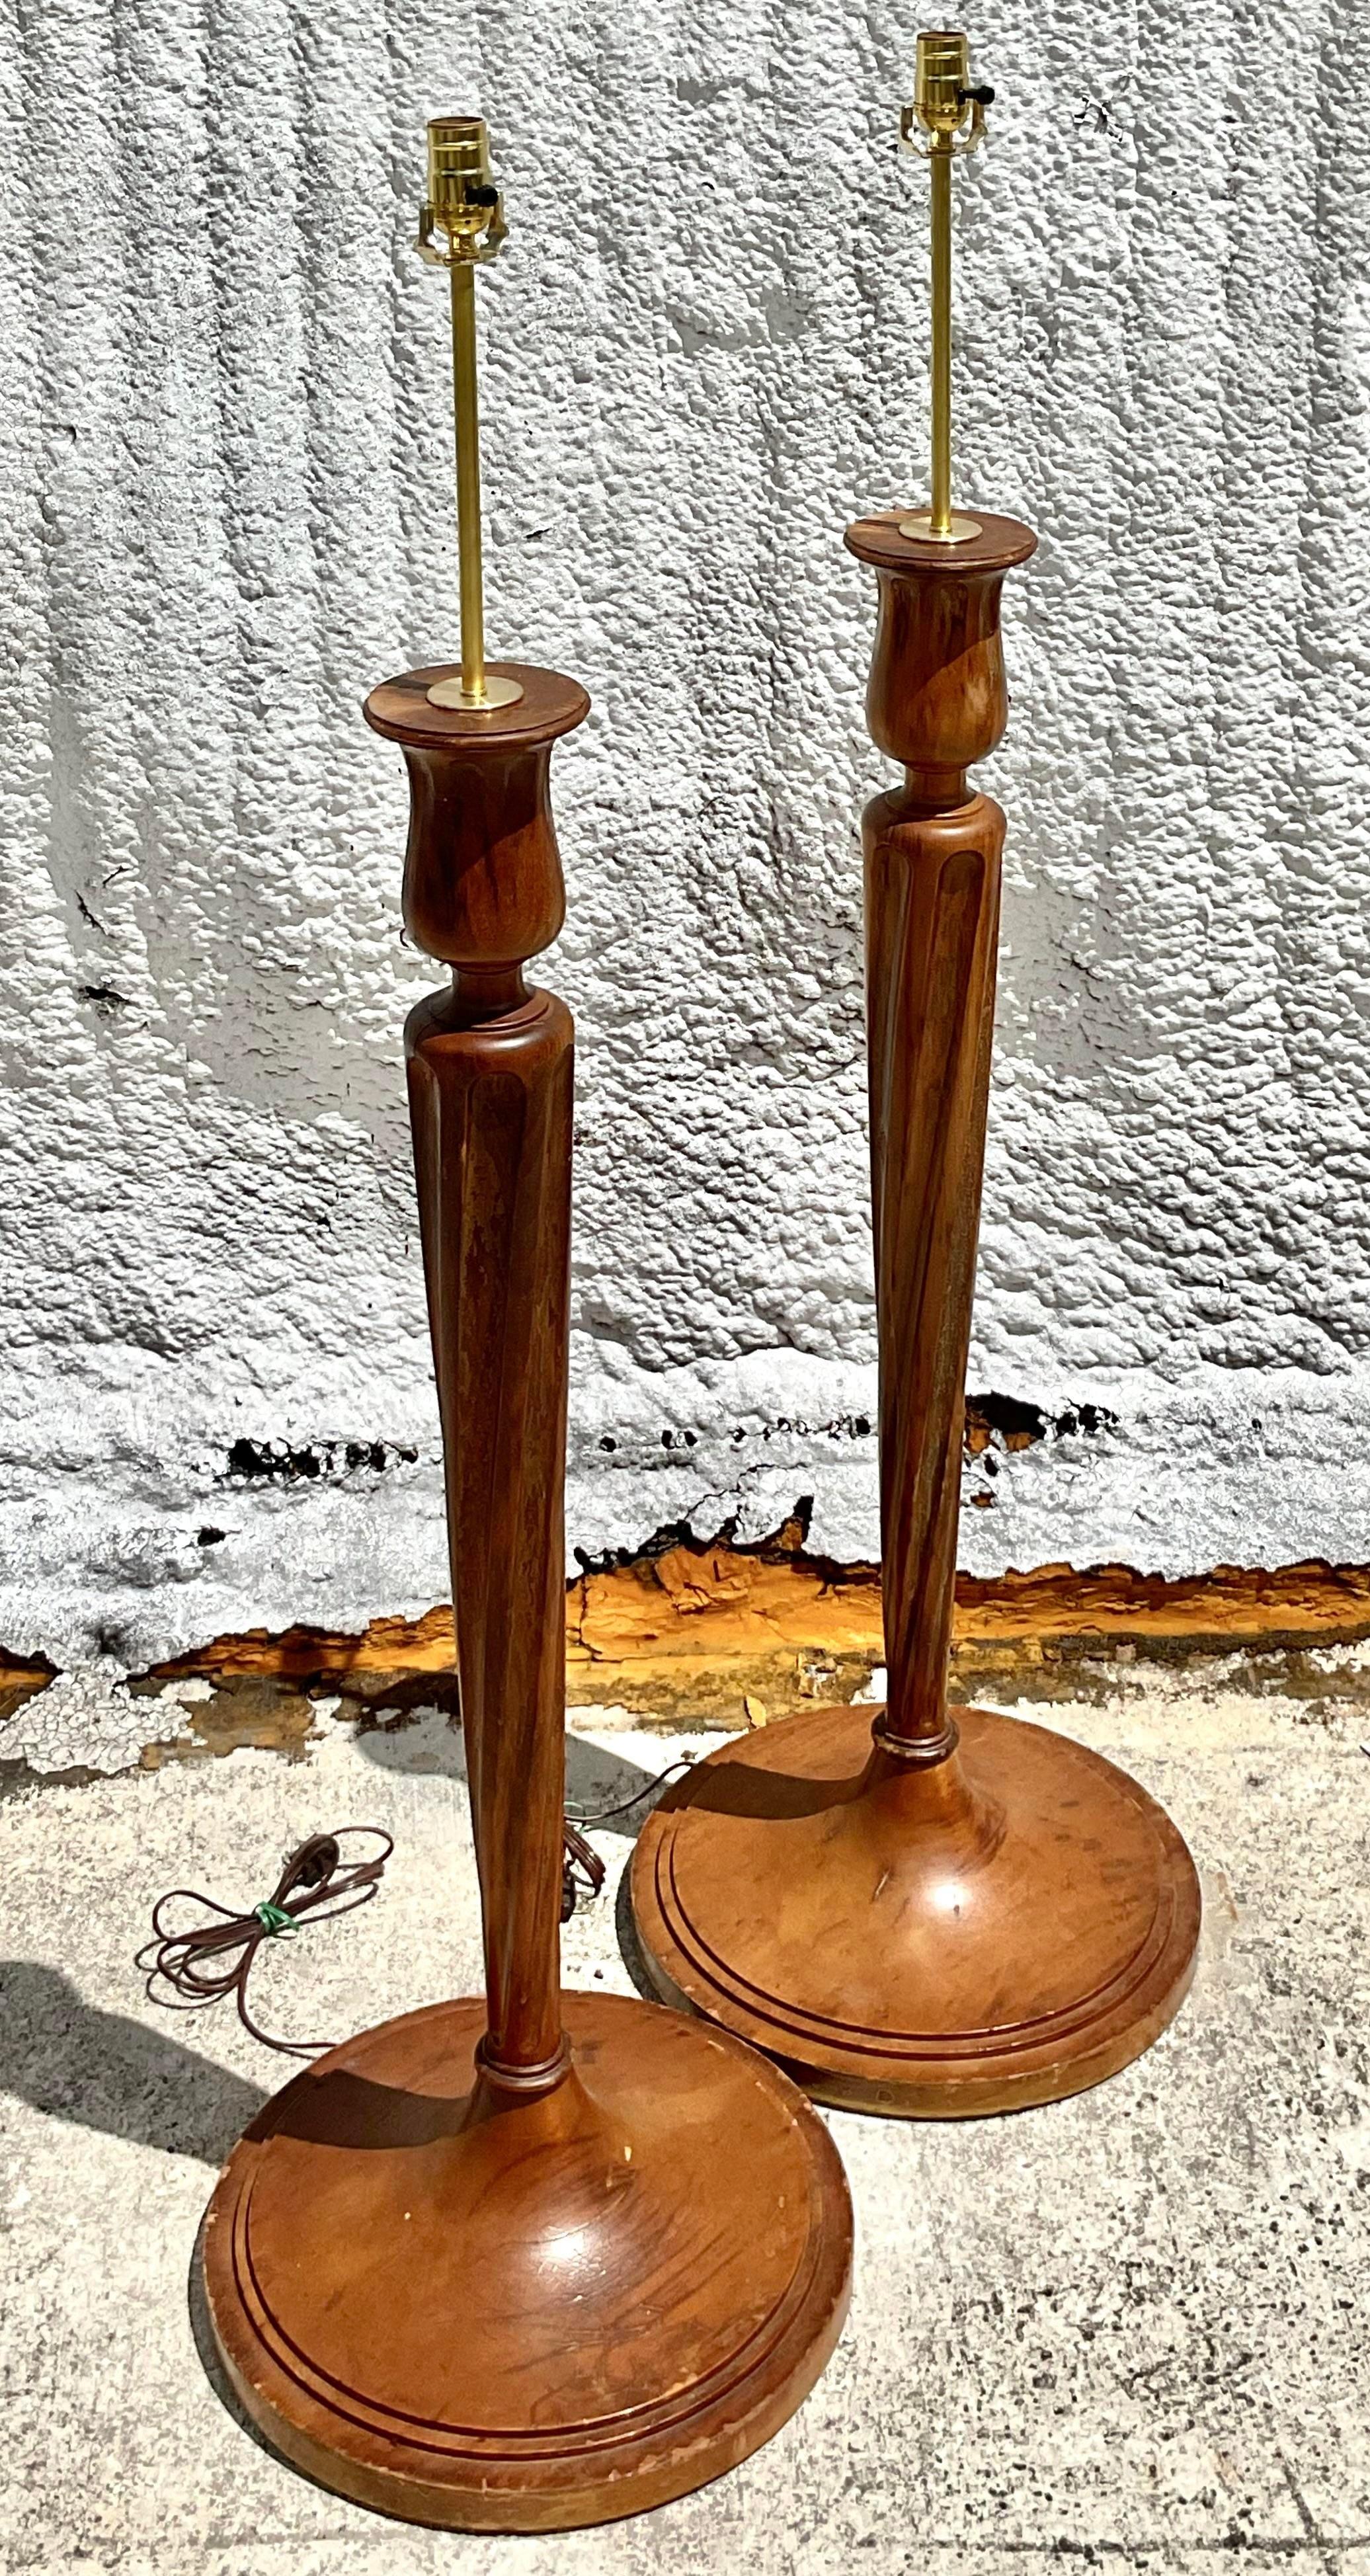 A fabulous pair of vintage Regency wood floor lamps. Beautiful classic candlestick design. Fully restored with all new wiring and hardware. Acquired from a Palm Beach estate.